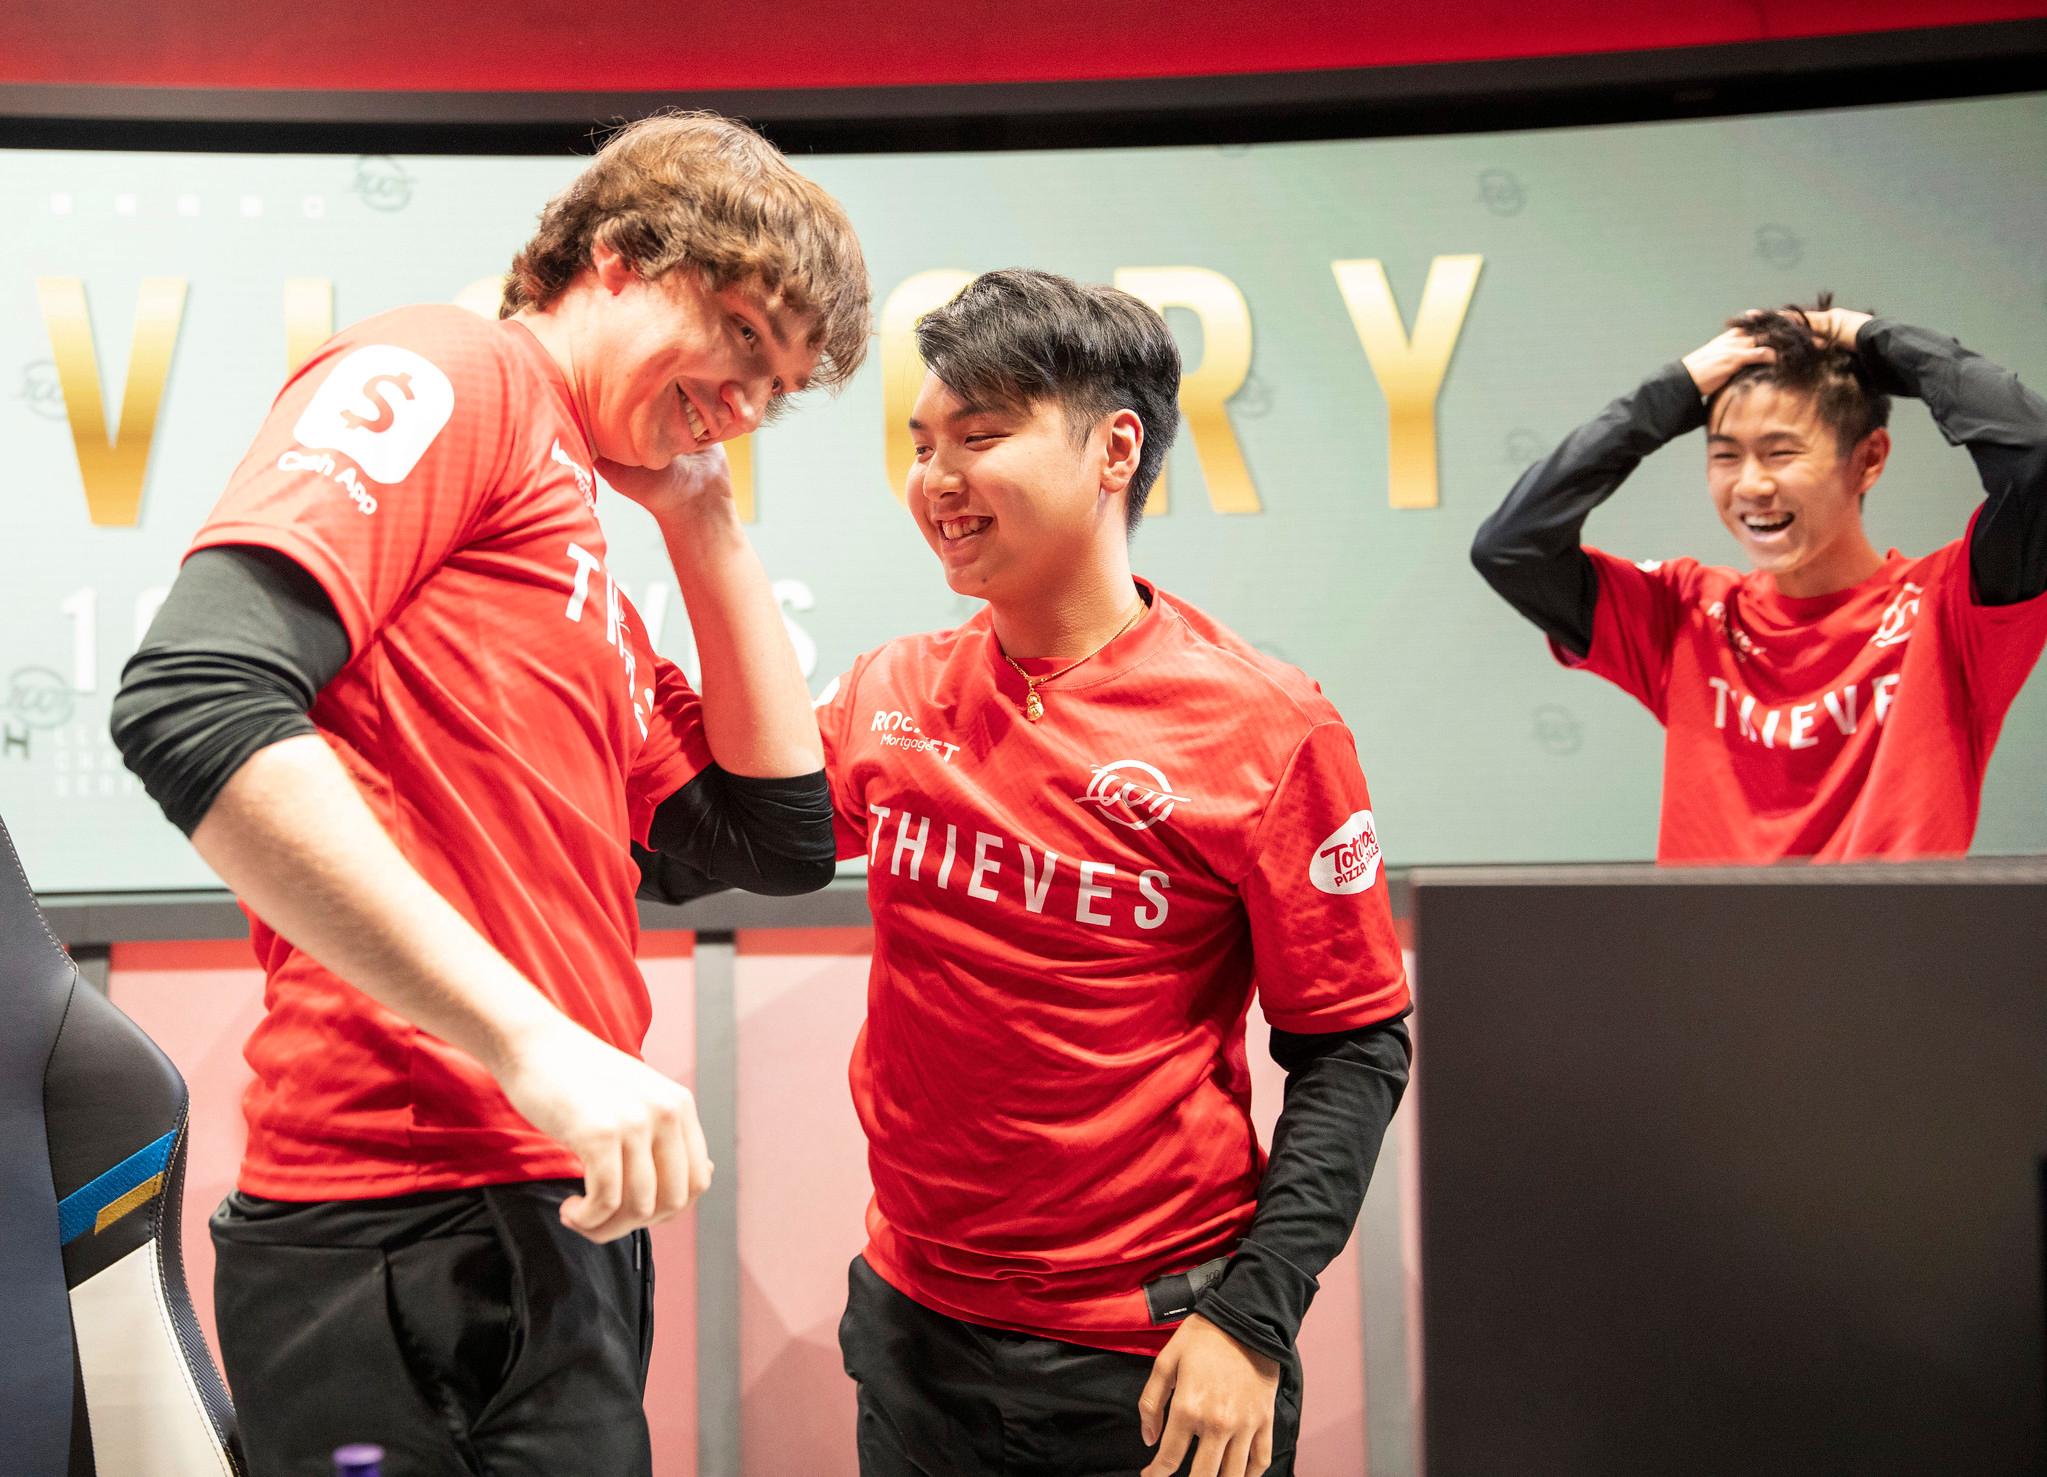 Meteos and Ryoma celebrate at the LCS studio